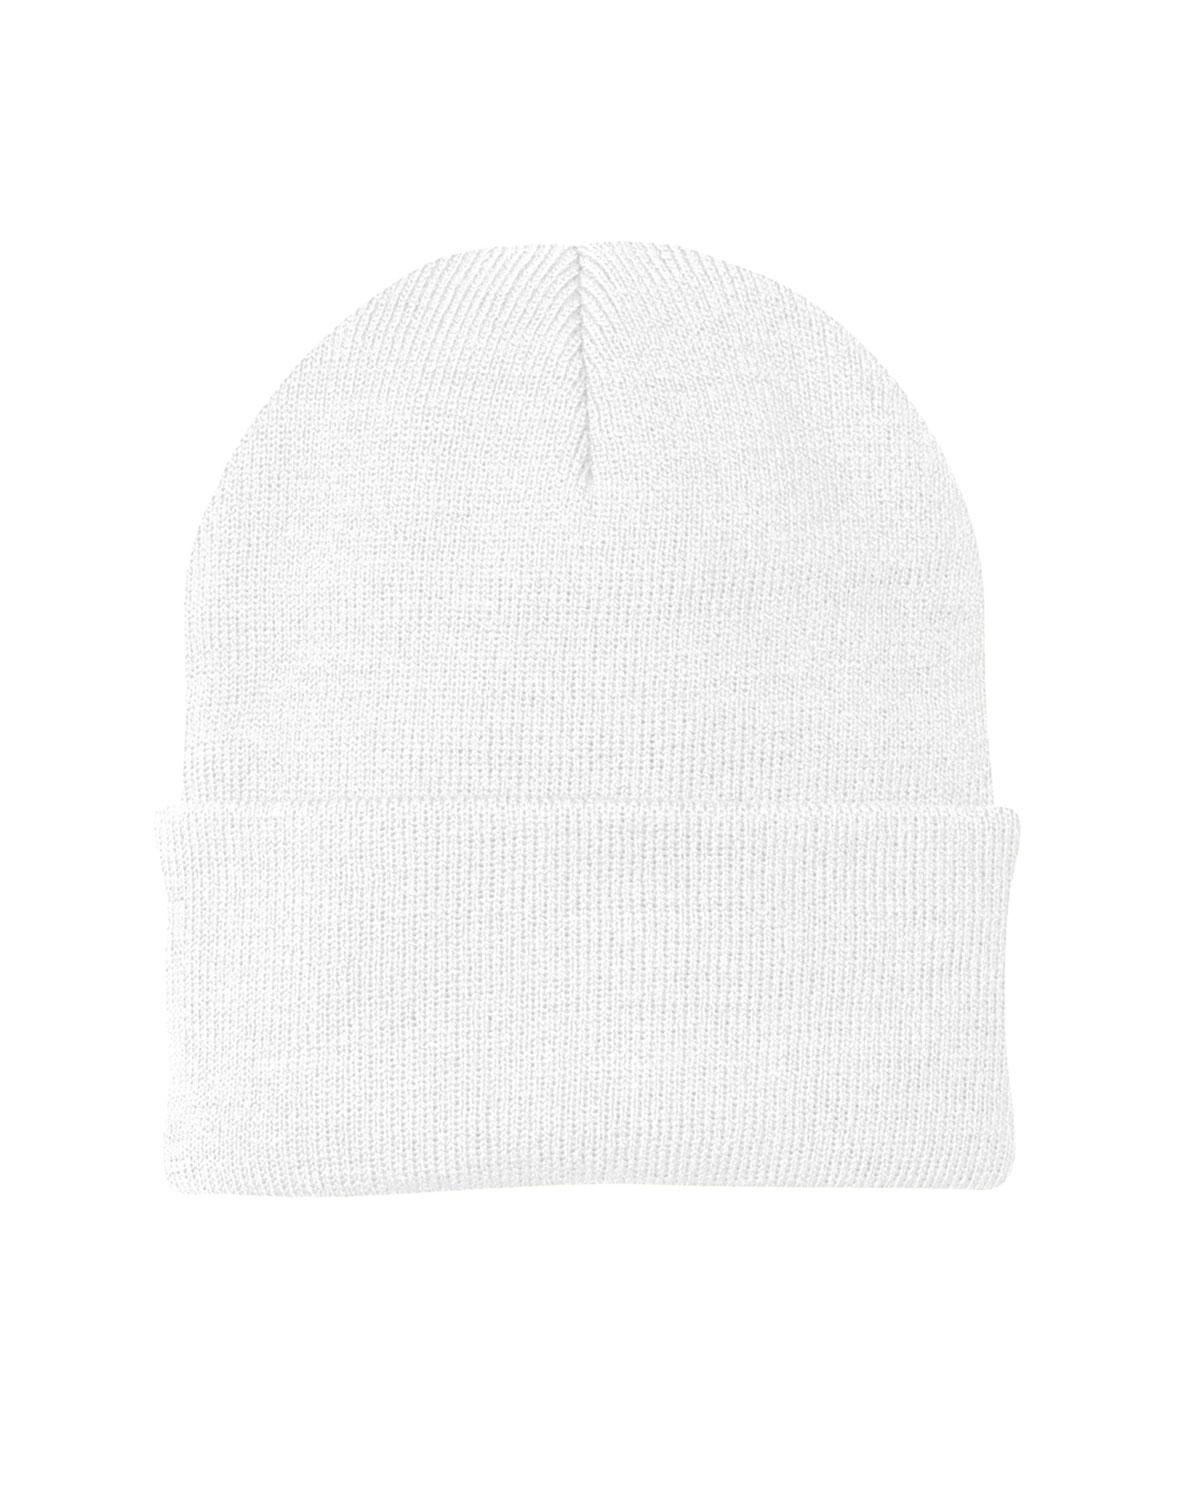 'Port & Company CP90 Folding Cuff for Easy Embroidery Knit Cap'